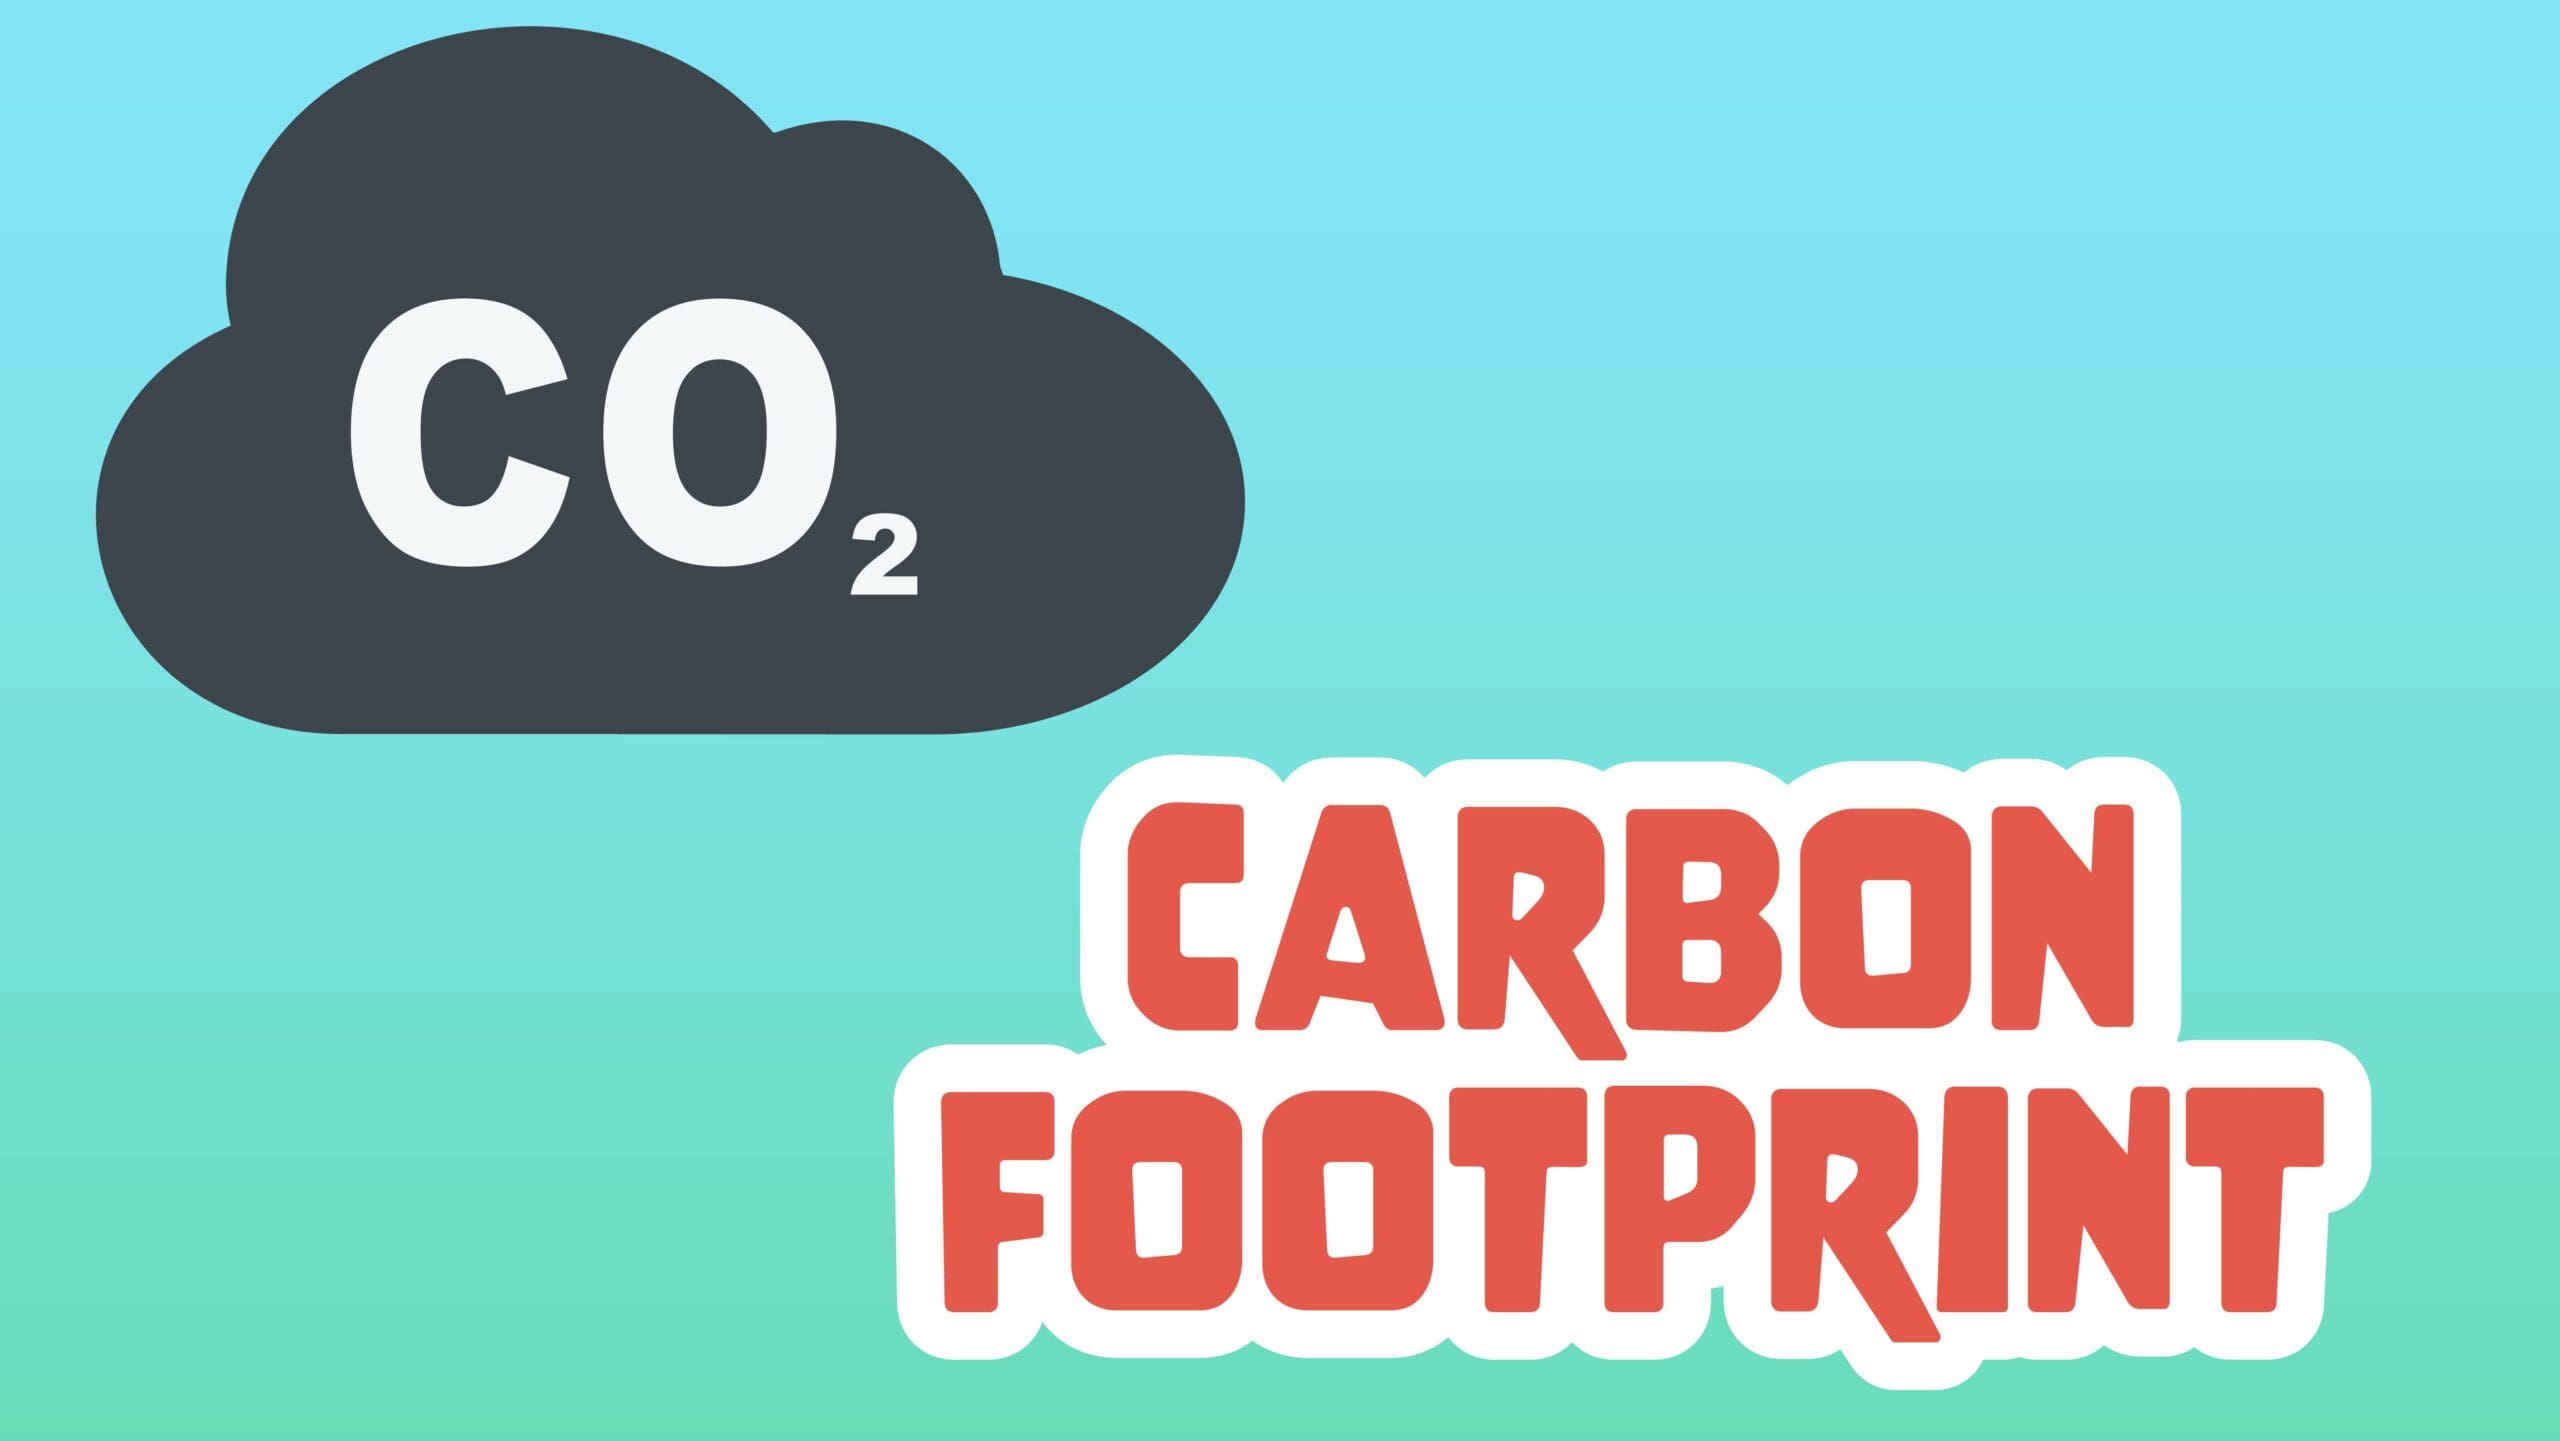 Carbon Footprint Facts for Kids – 5 Critical Facts about Reducing Carbon Footprint